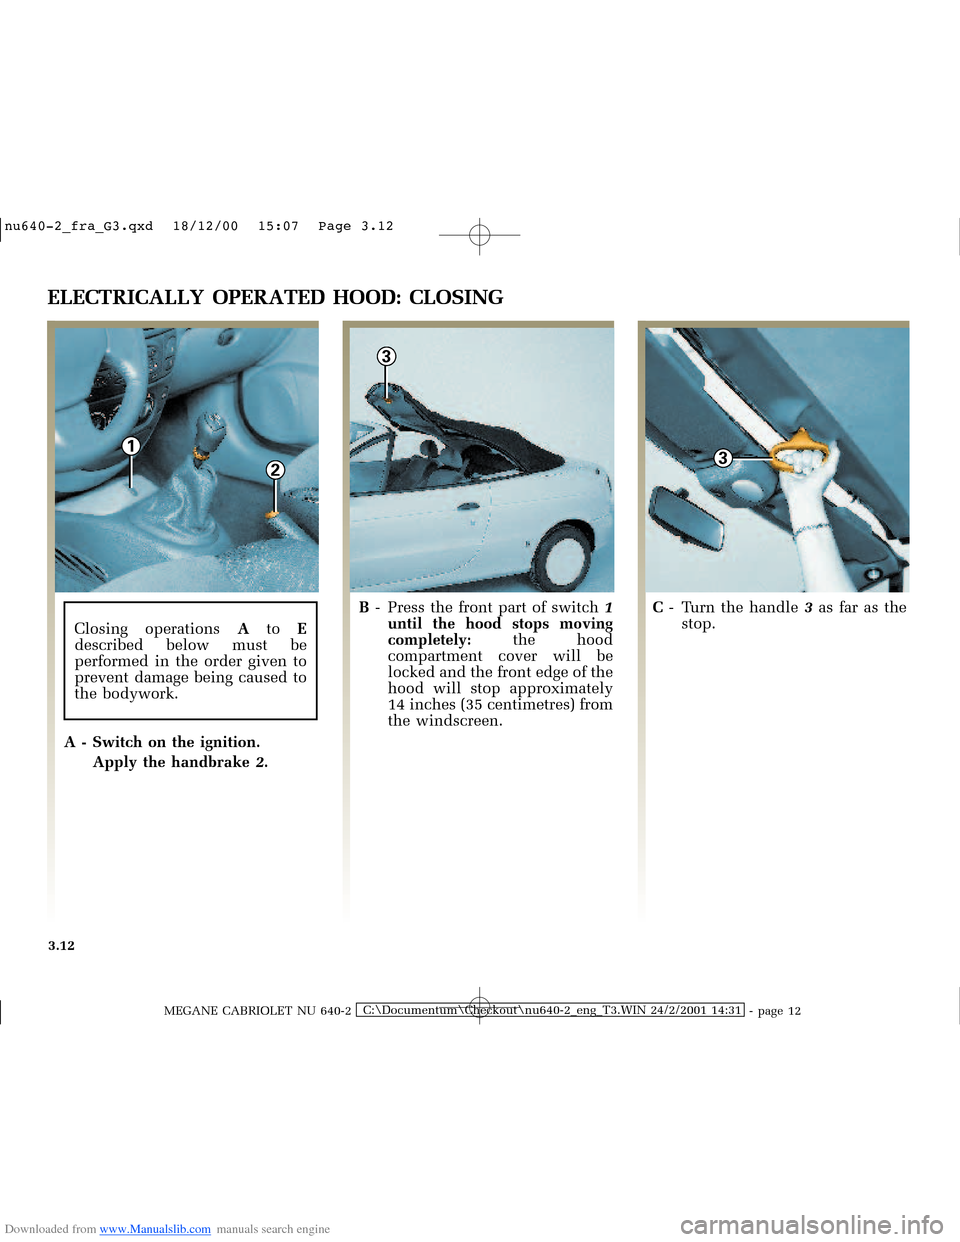 RENAULT MEGANE 2000 X64 / 1.G Owners Manual Downloaded from www.Manualslib.com manuals search engine 3
31
2
�Q�X������B�I�U�D�B�*���T�[�G� � ��������� � ������ � �3�D�J�H� ����
MEGANE CABRIOLET NU 640-2C:\Document